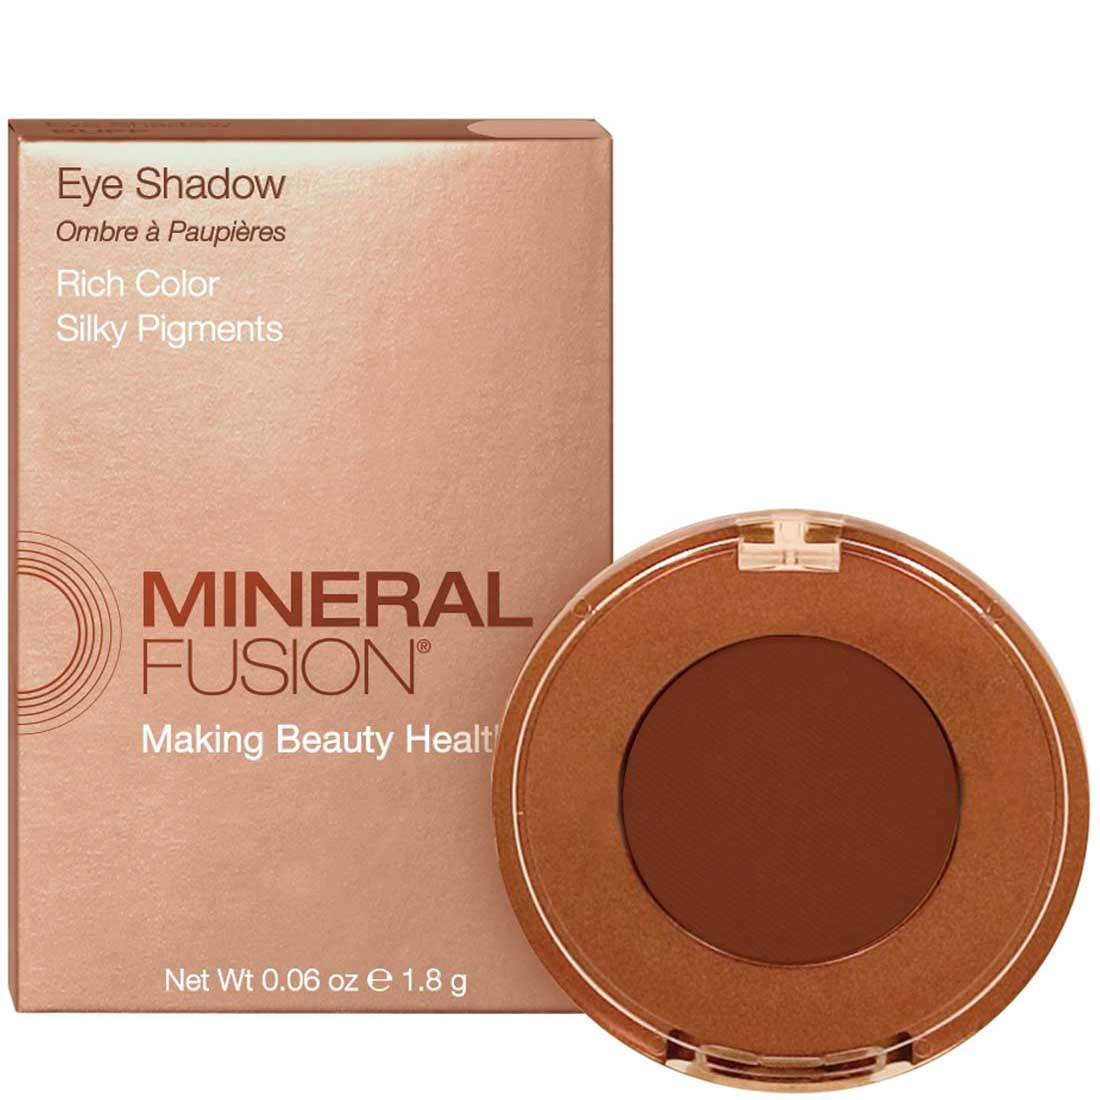 Mineral Fusion Eye Shadow, 3g, Clearance 35% Off, Final Sale